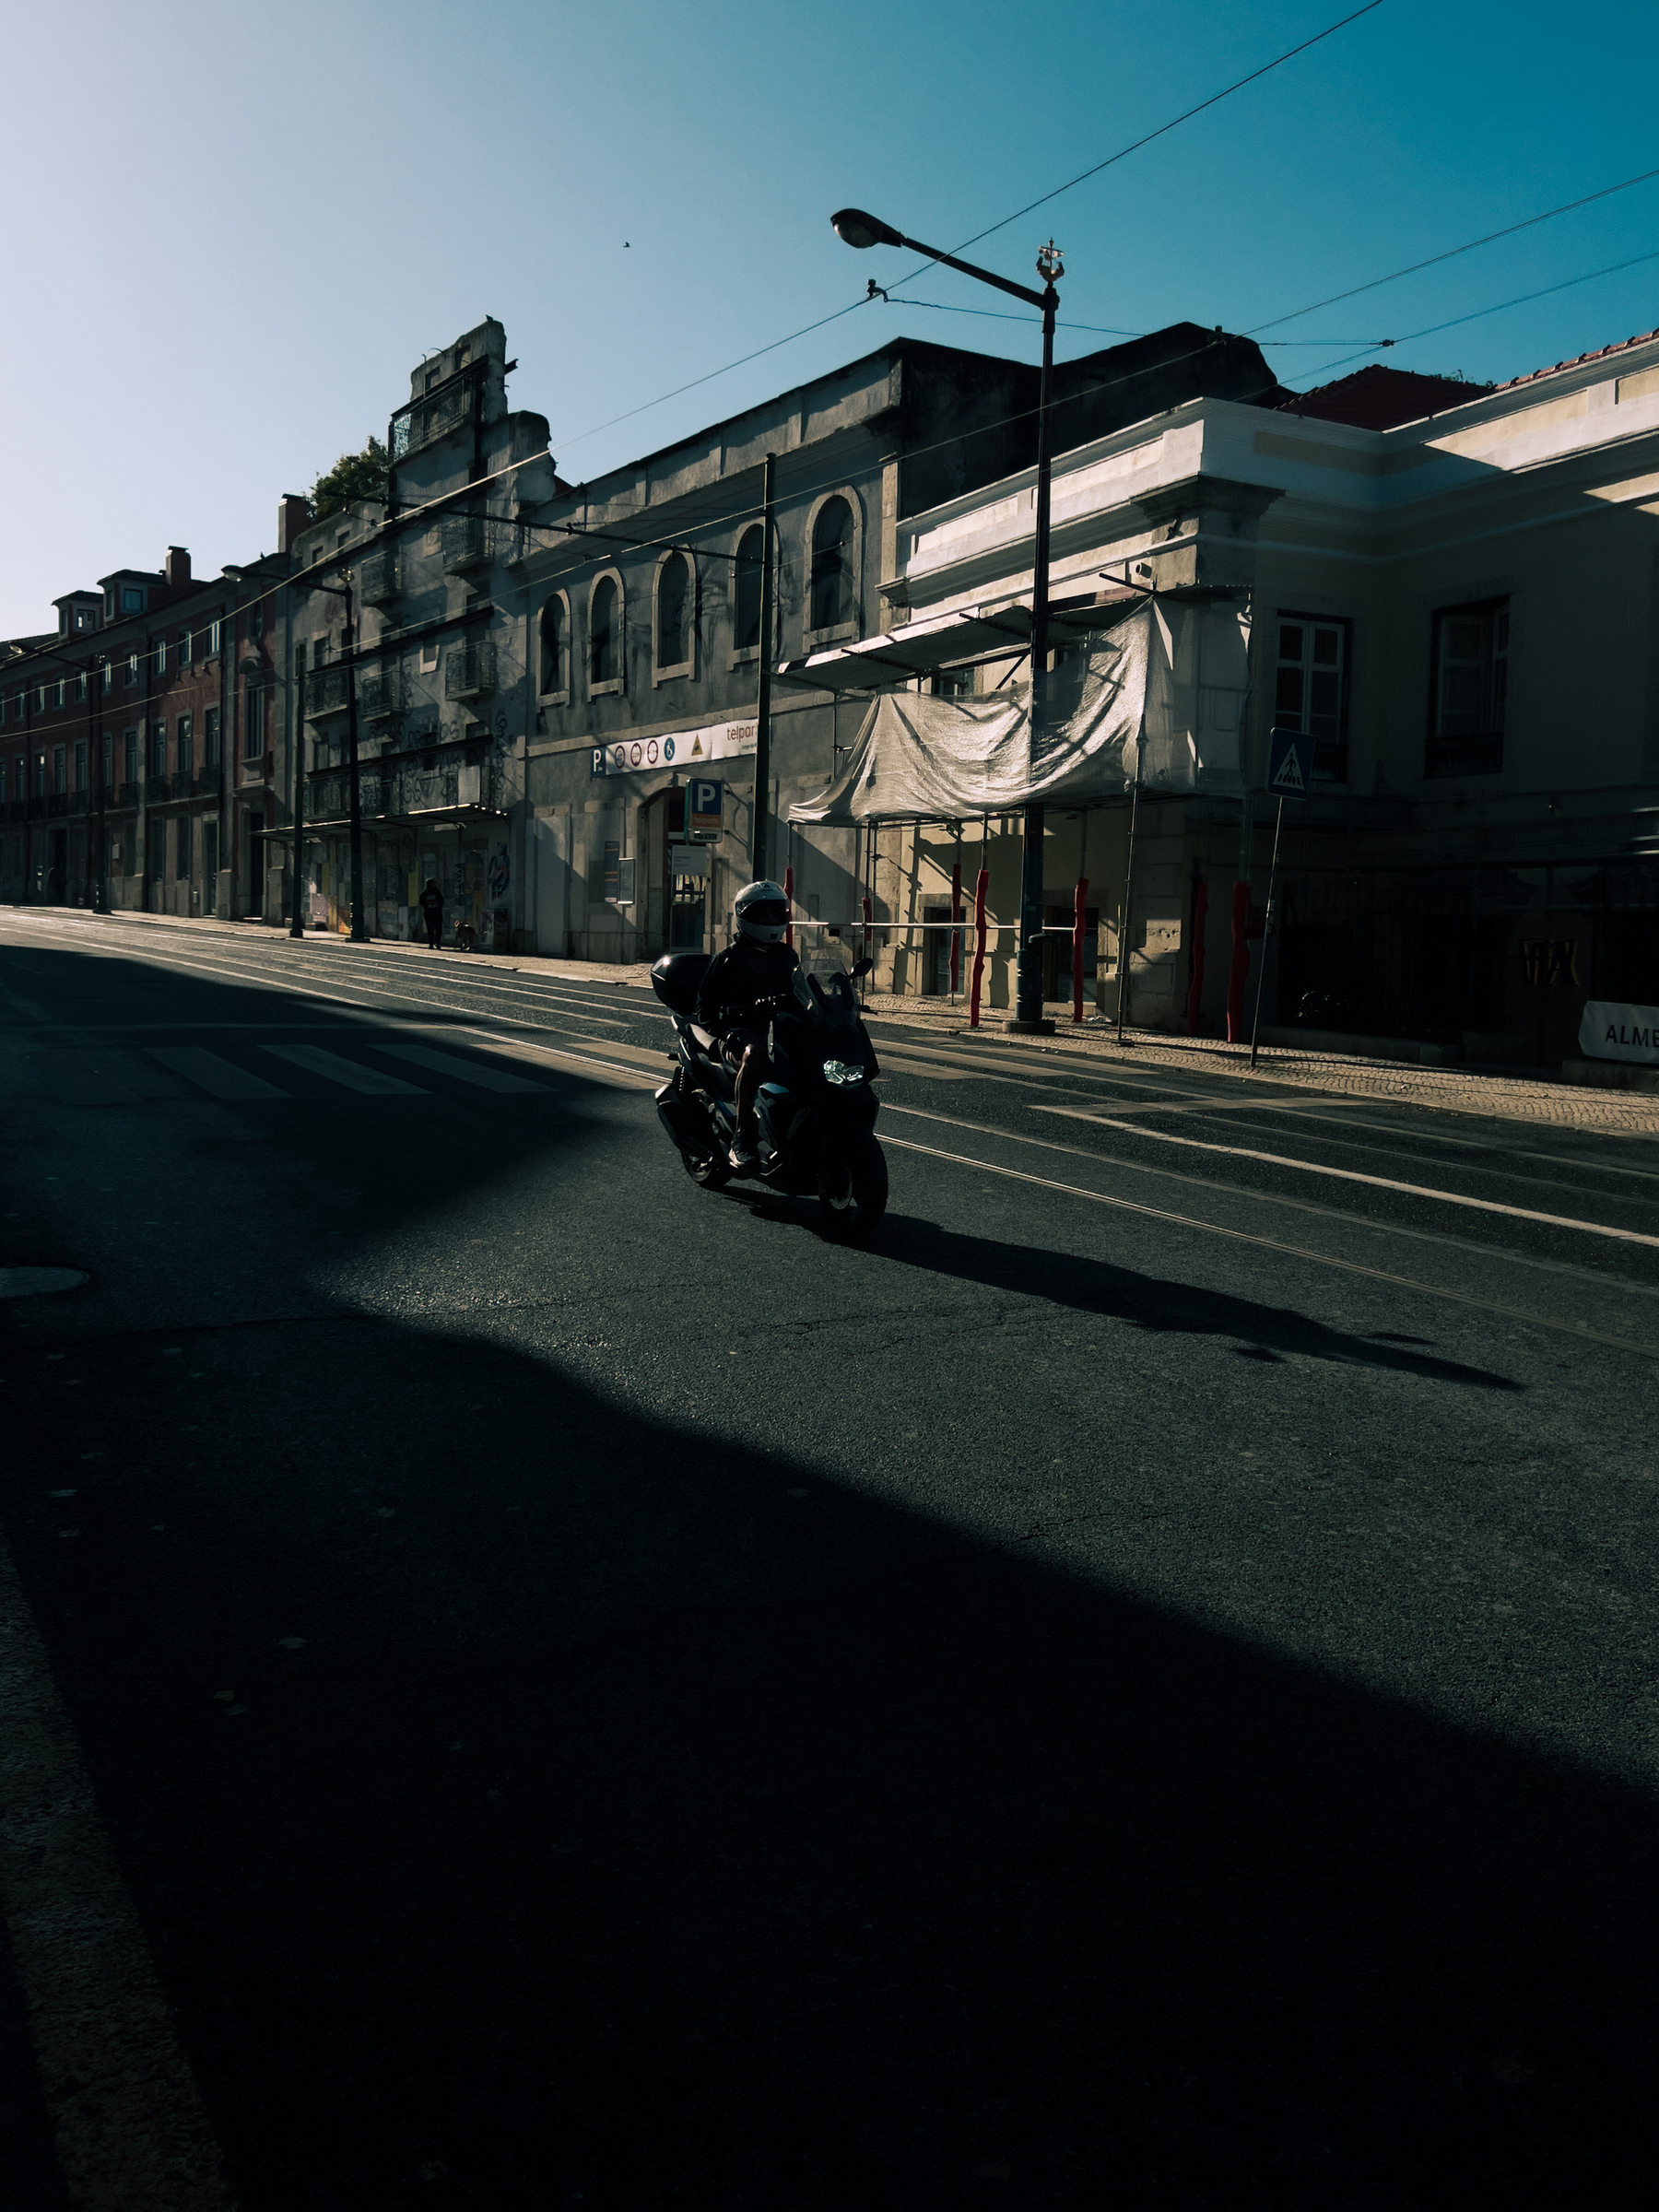 A lone motorcycle riding by.